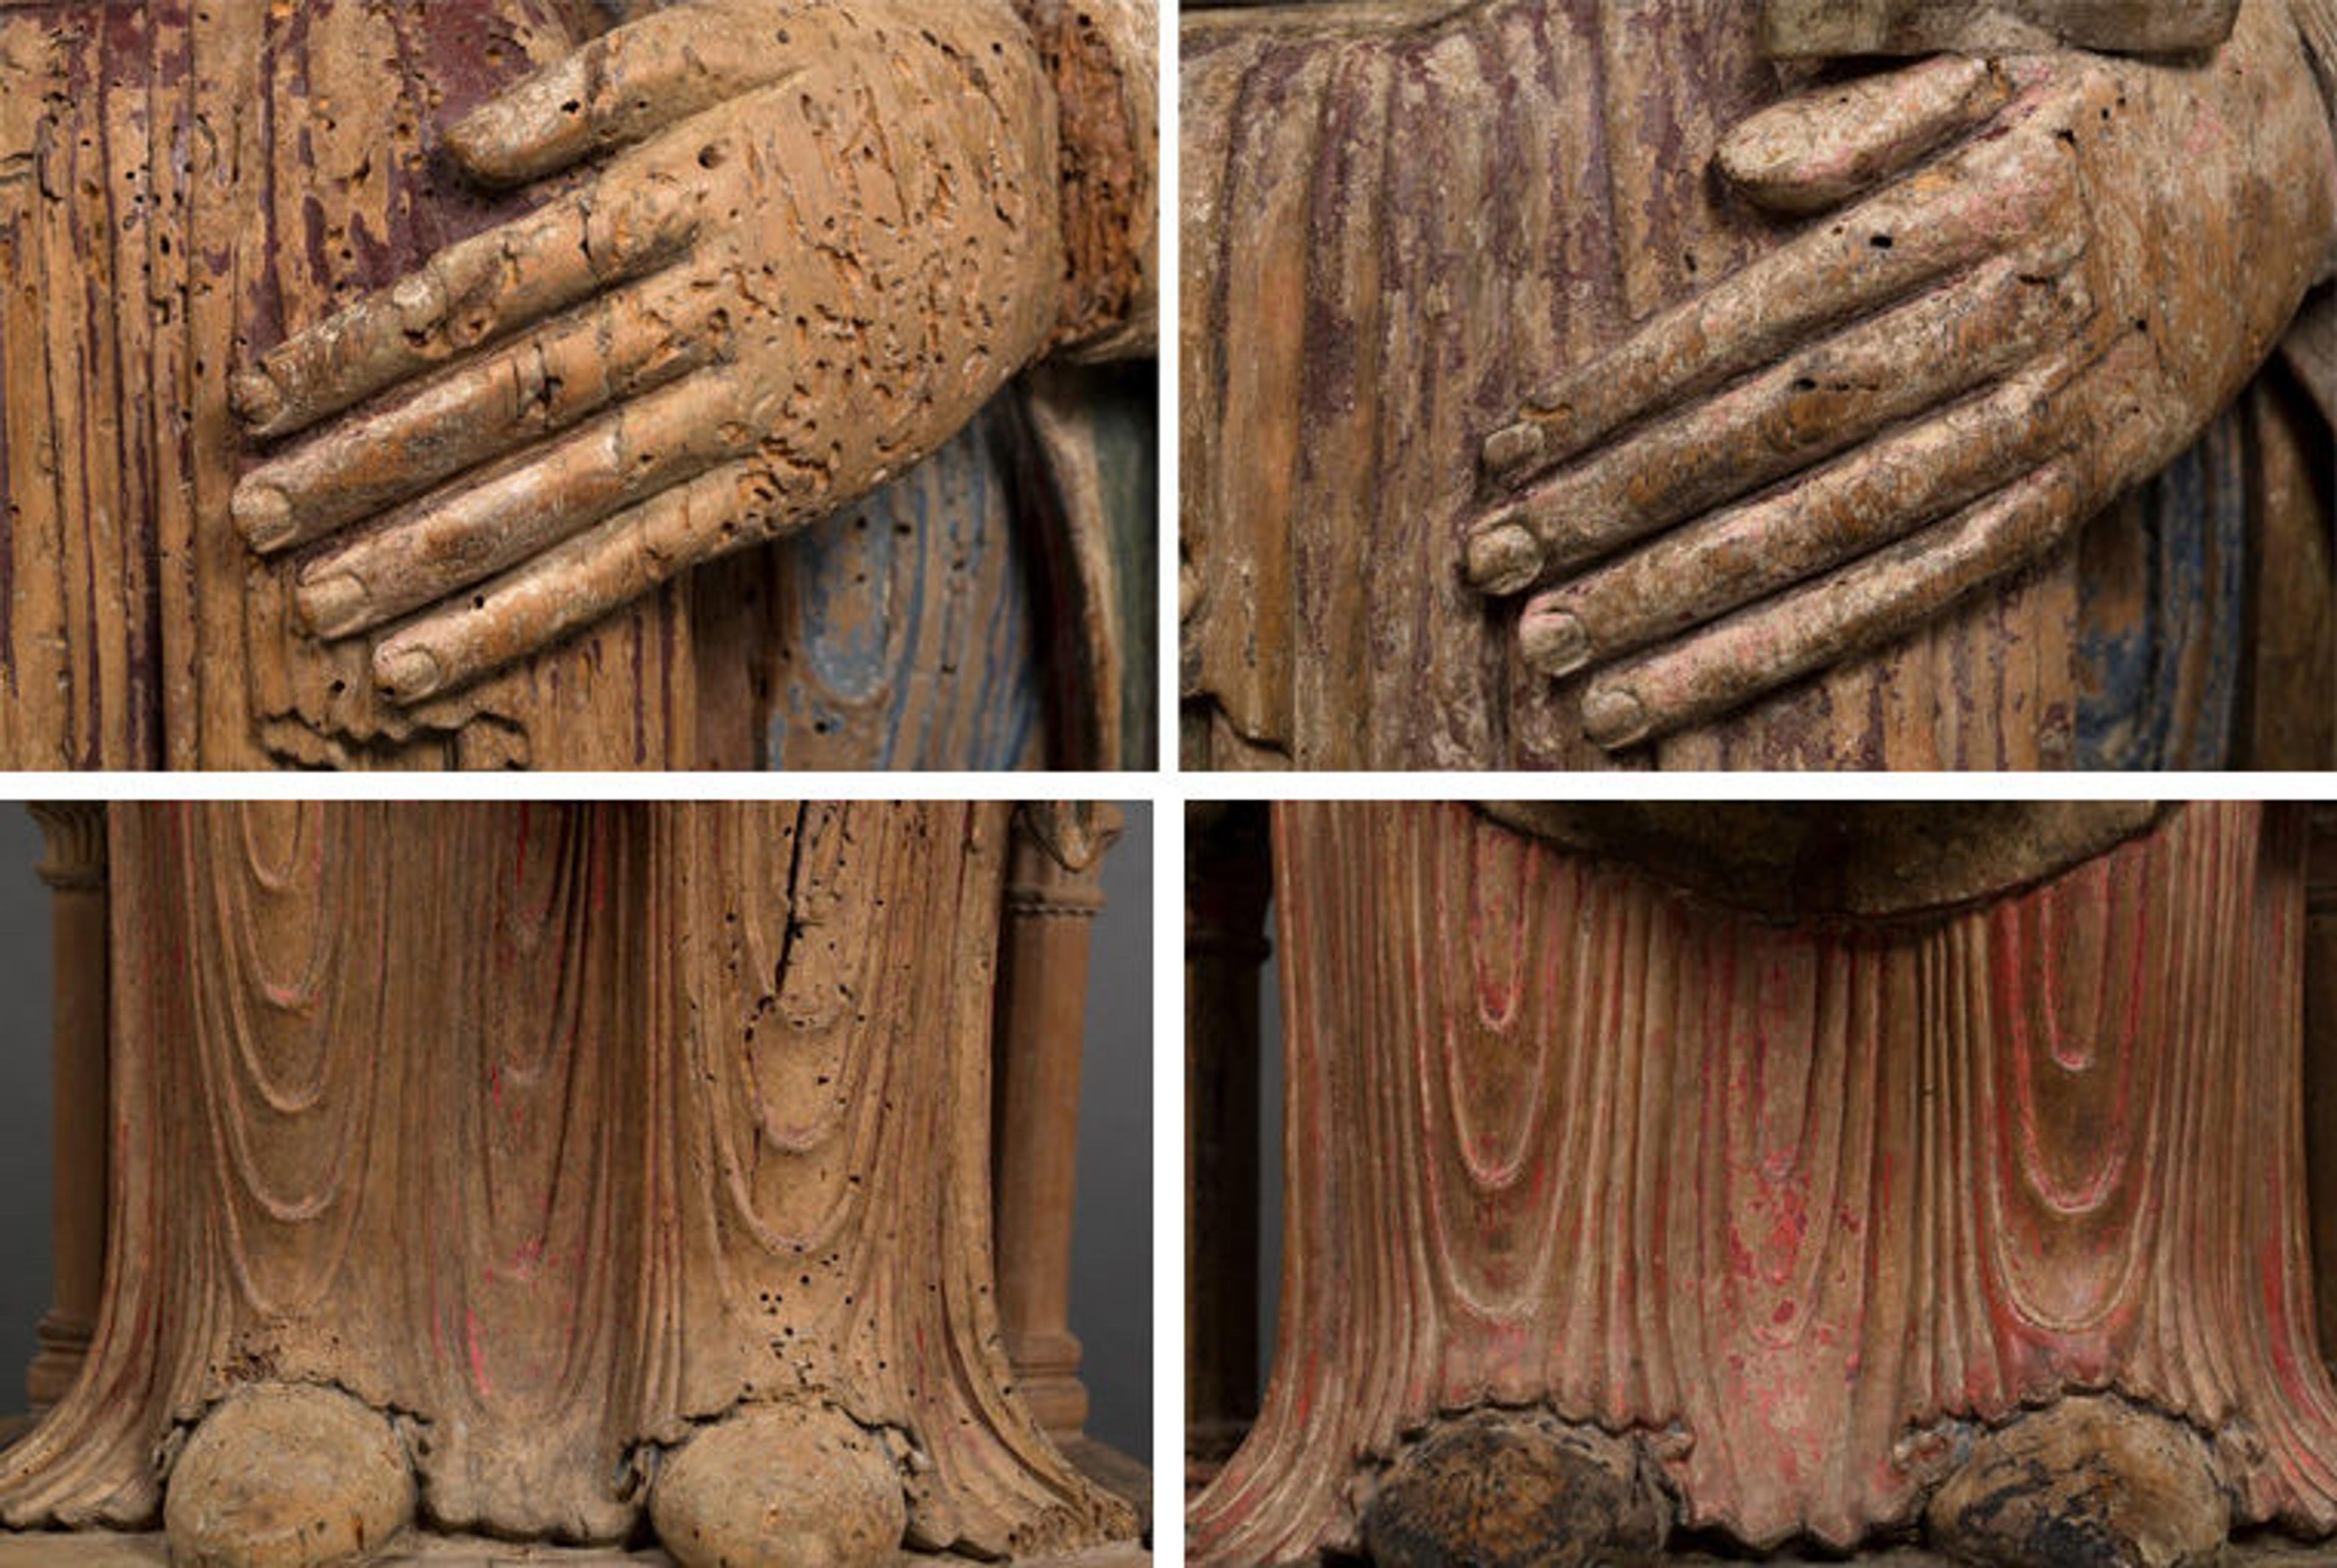 Detail views of two twelfth-century sculptures of the Virgin, here showing close-up views of the Virgins' hands and the folds of their garments